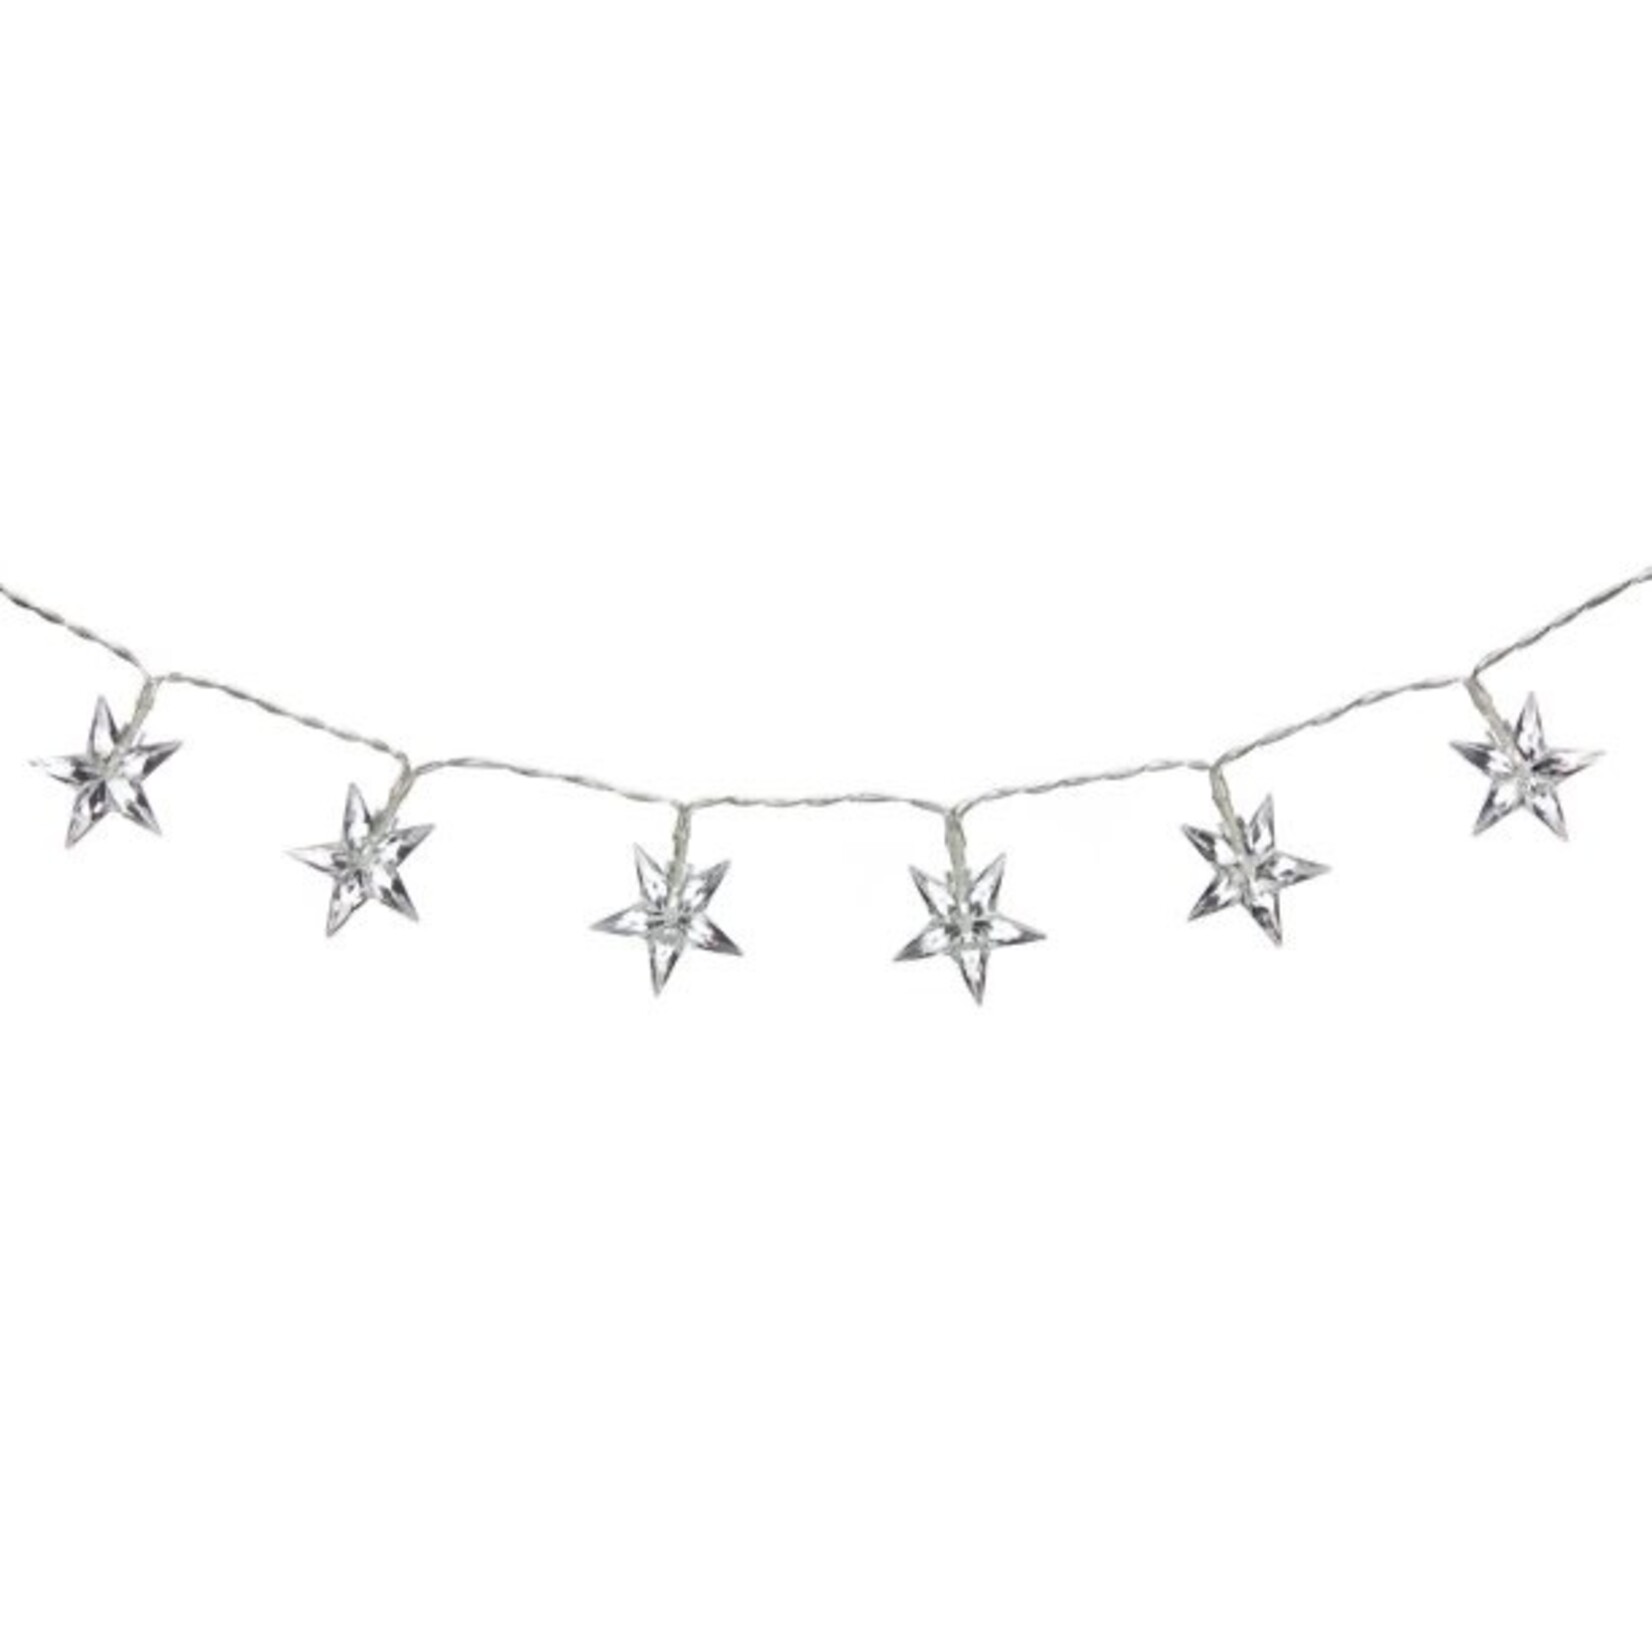 Evergreen Clear Star String Lights